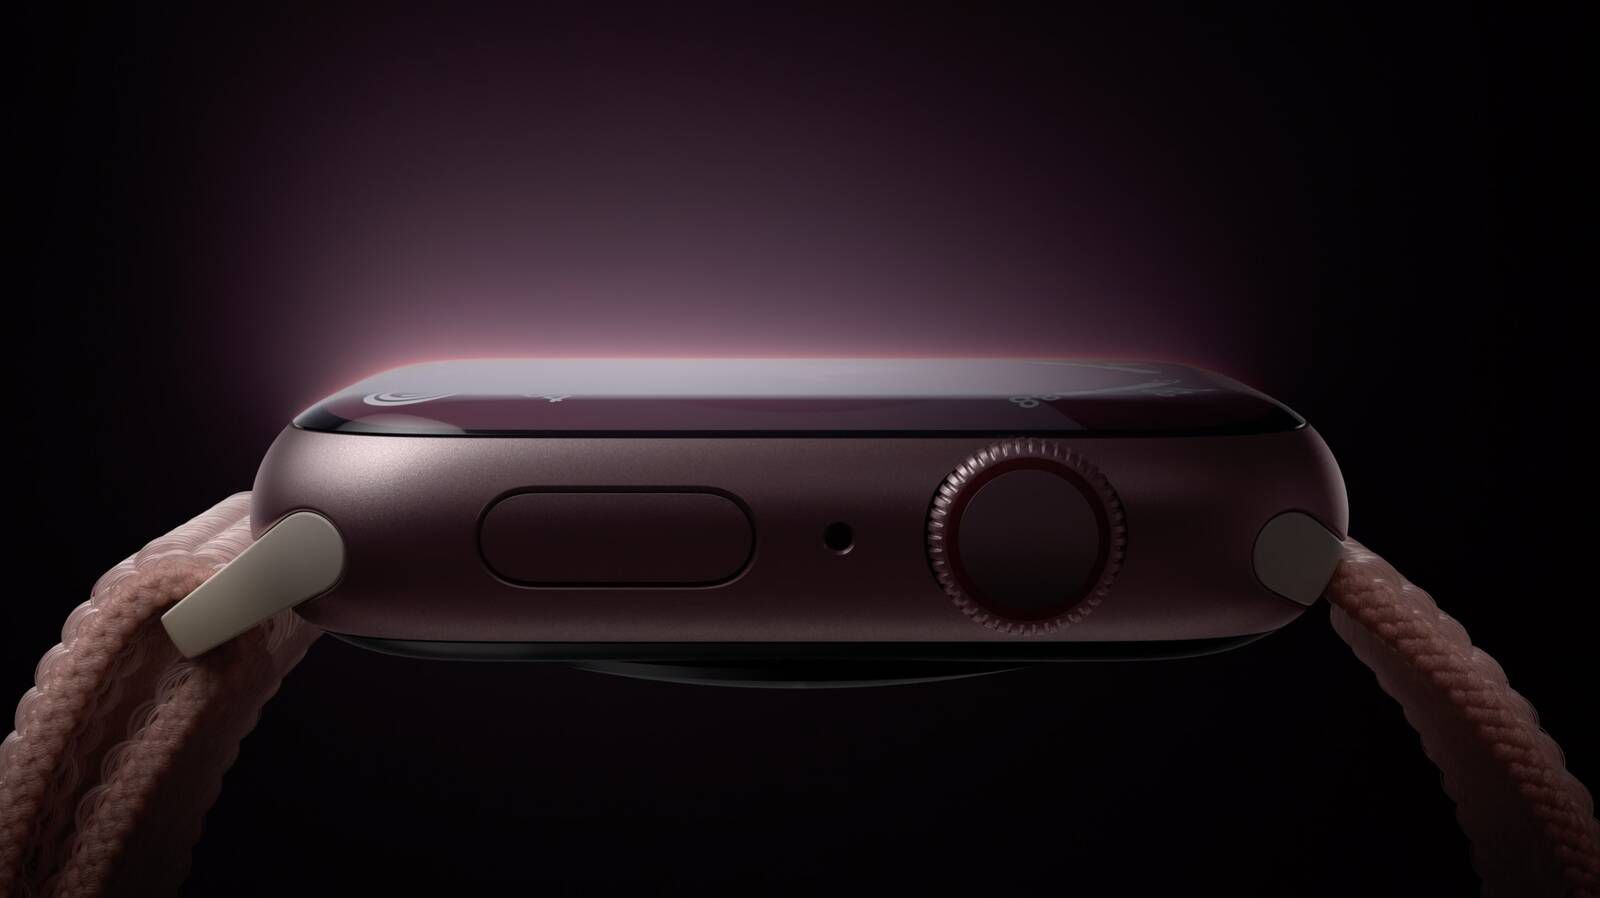 Apple Watch Series 9 Unveiled With S9 Chip, 'Double Tap' Gesture, and More